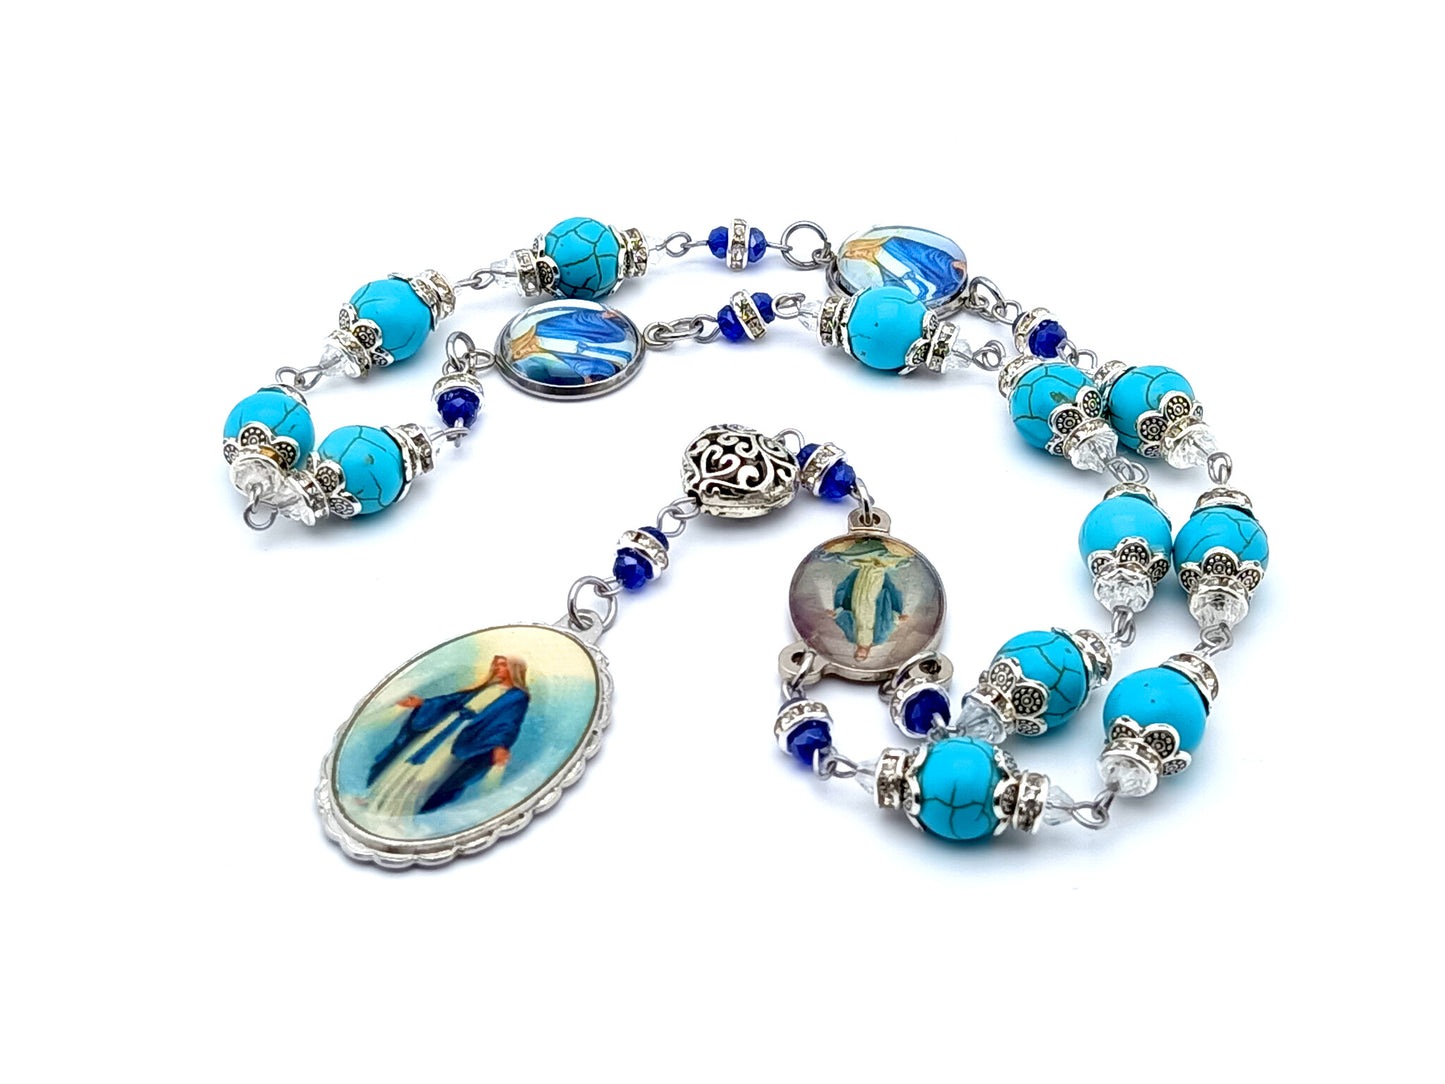 The Immaculate conception unique rosary beads prayer chaplet with turquoise gemstone beads and Our Lady of Grace picture medal.